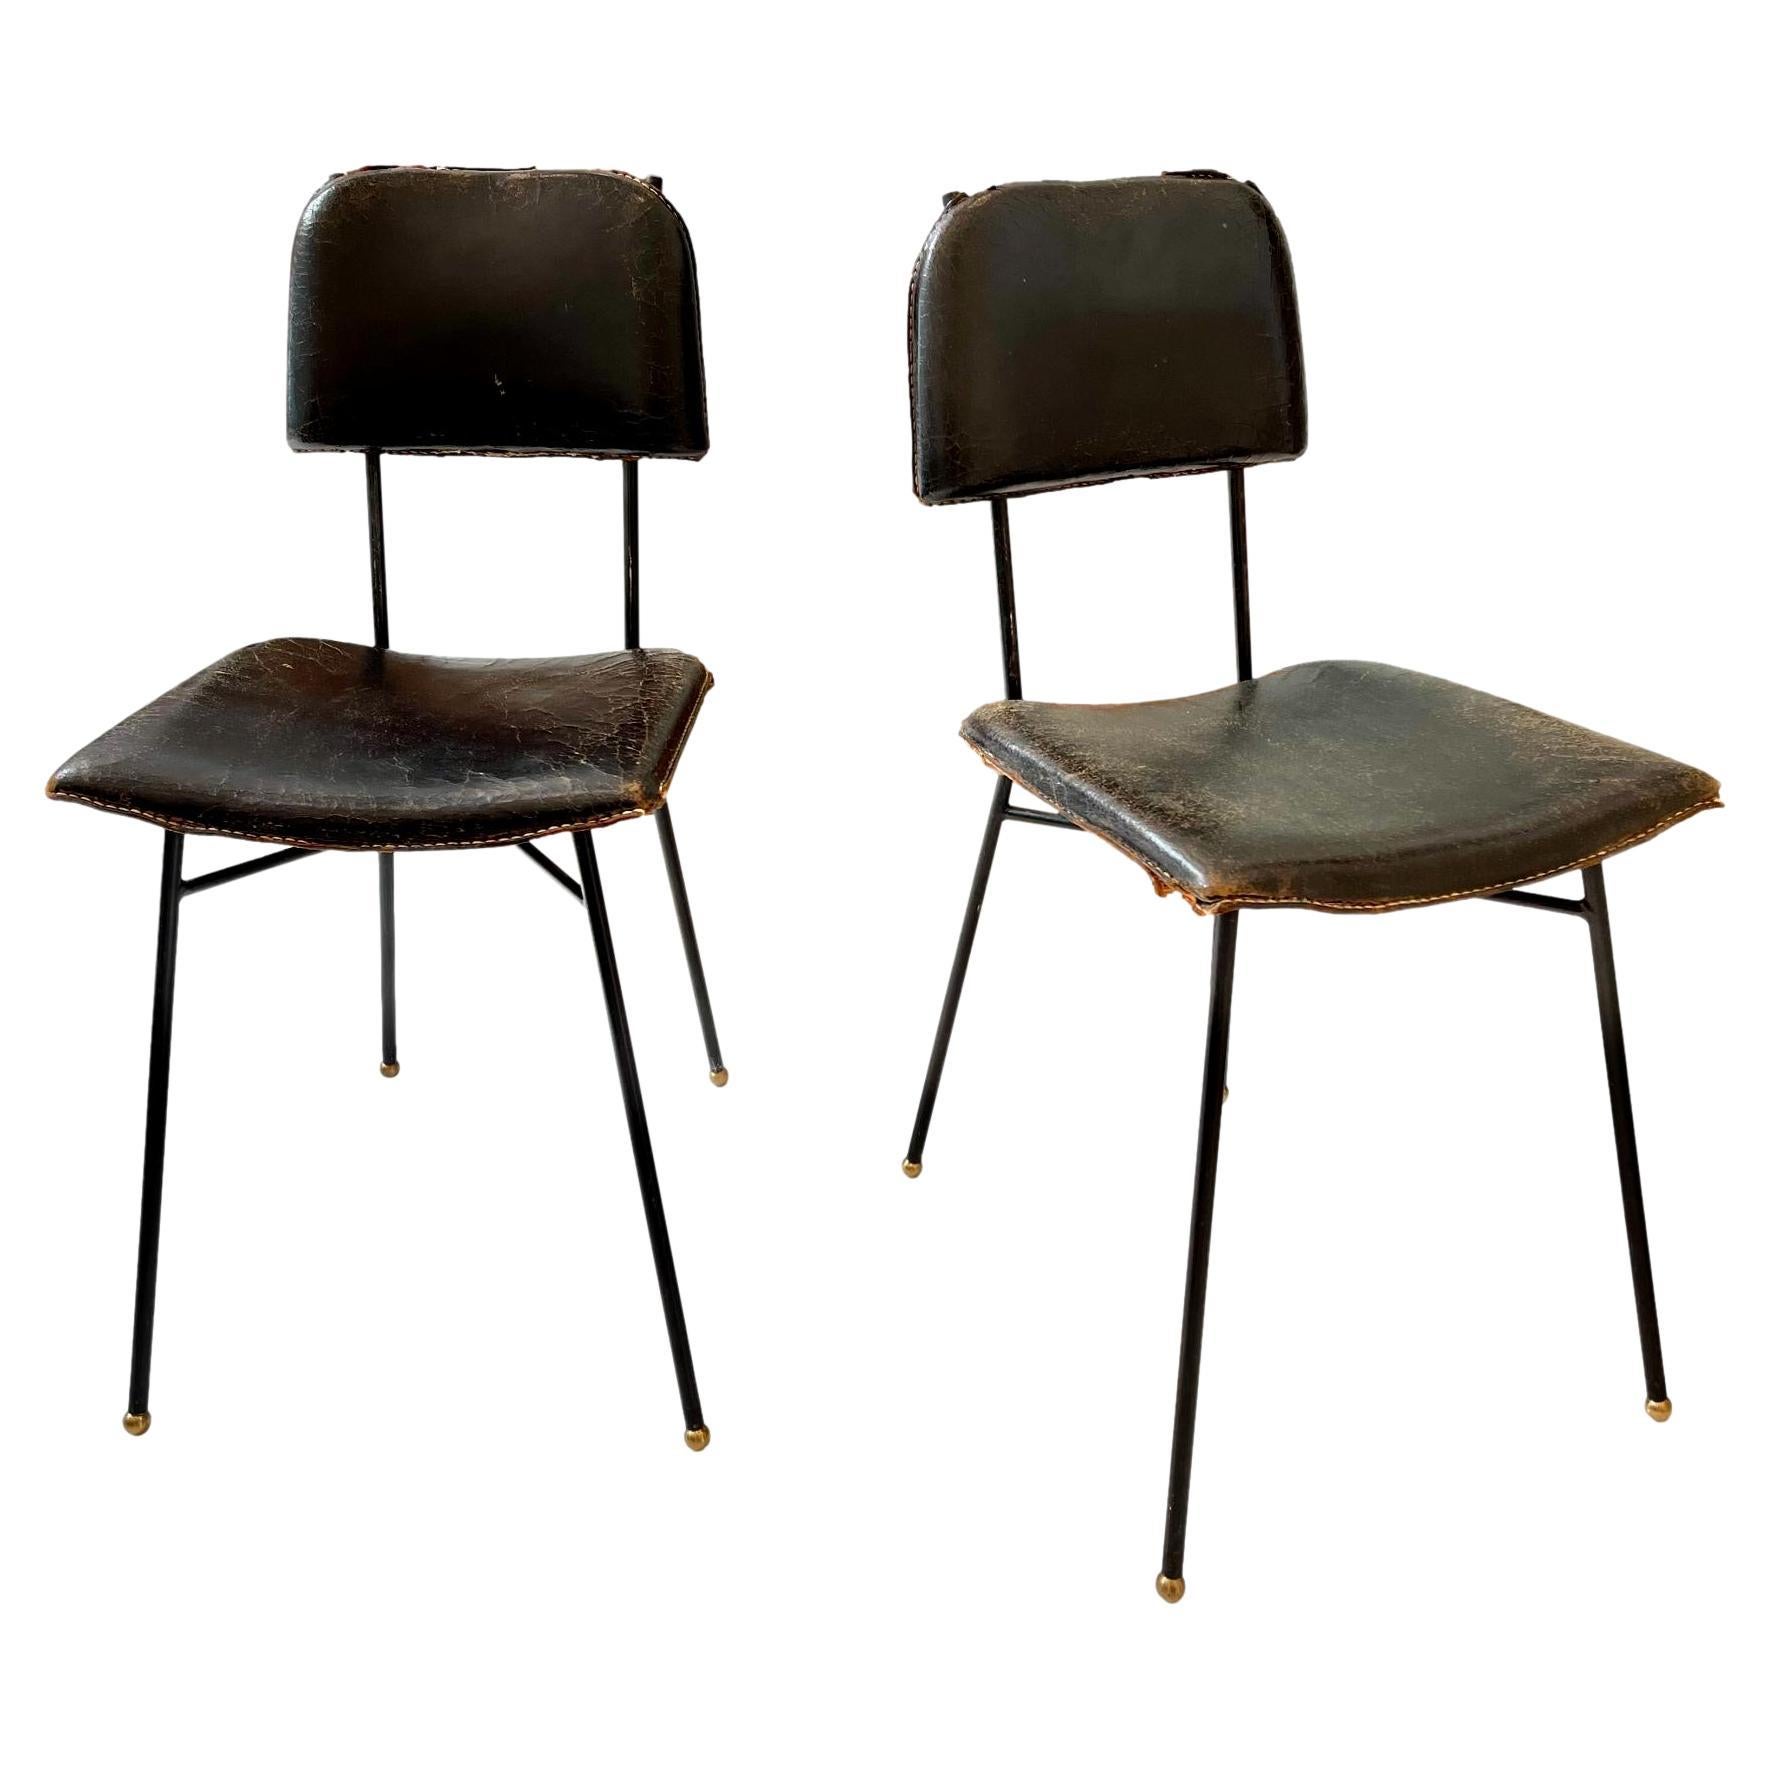 Pair of Jacques Adnet Black Leather Chairs, 1950s France